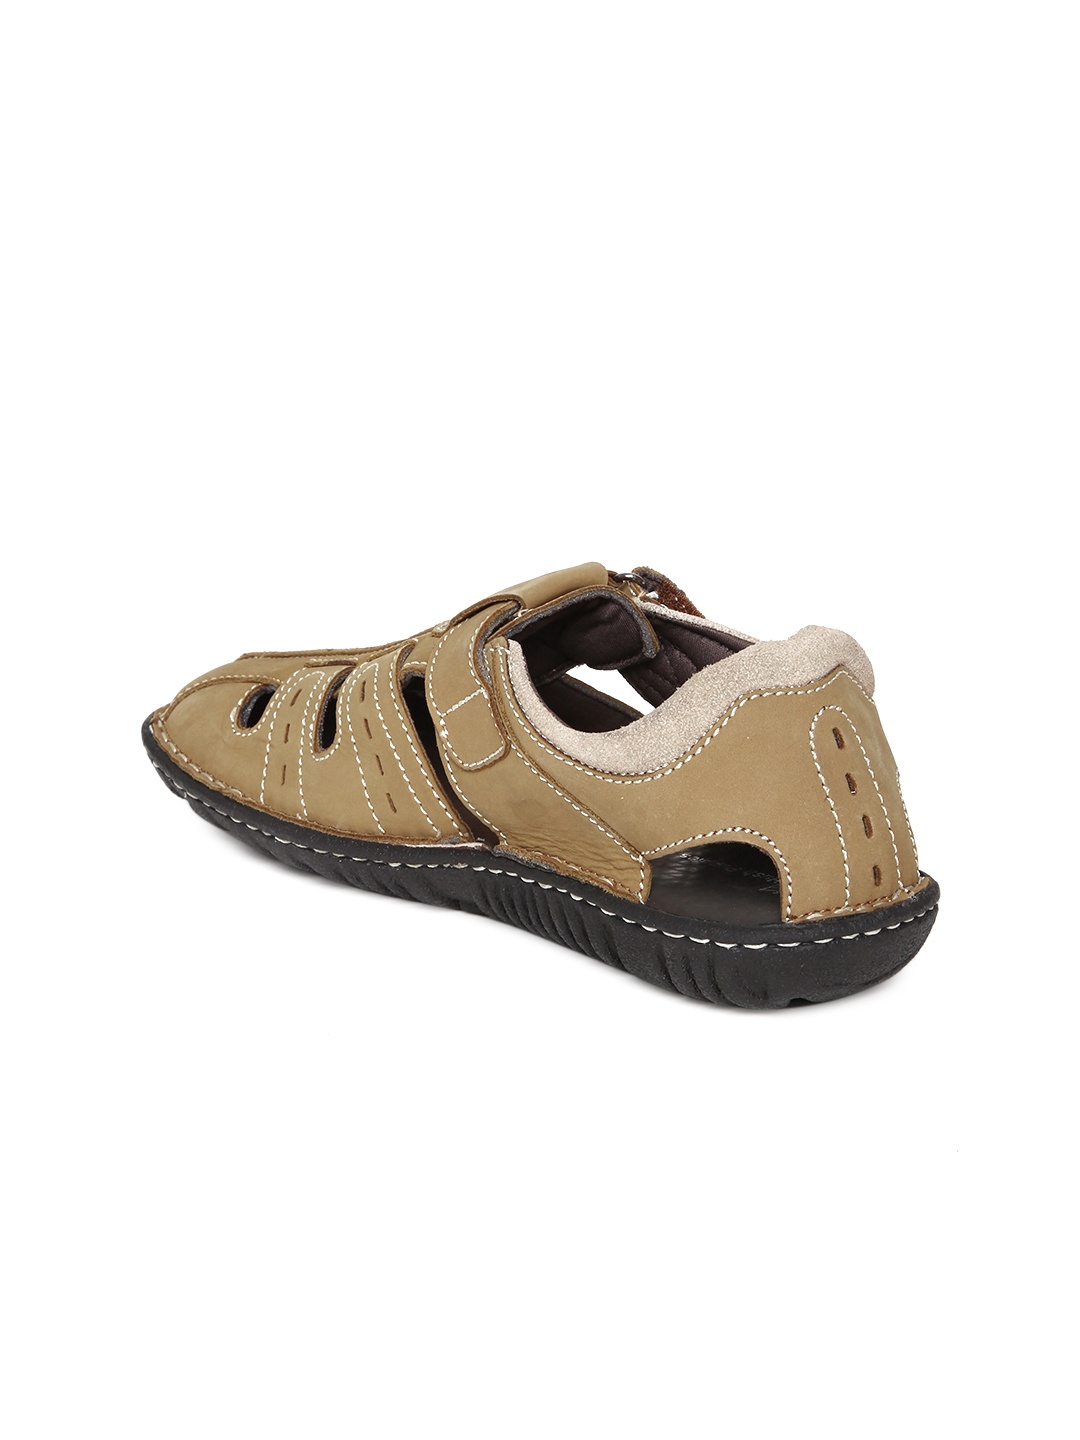 ... Details More Sandals by Hush Puppies More Brown Sandals More Sandals